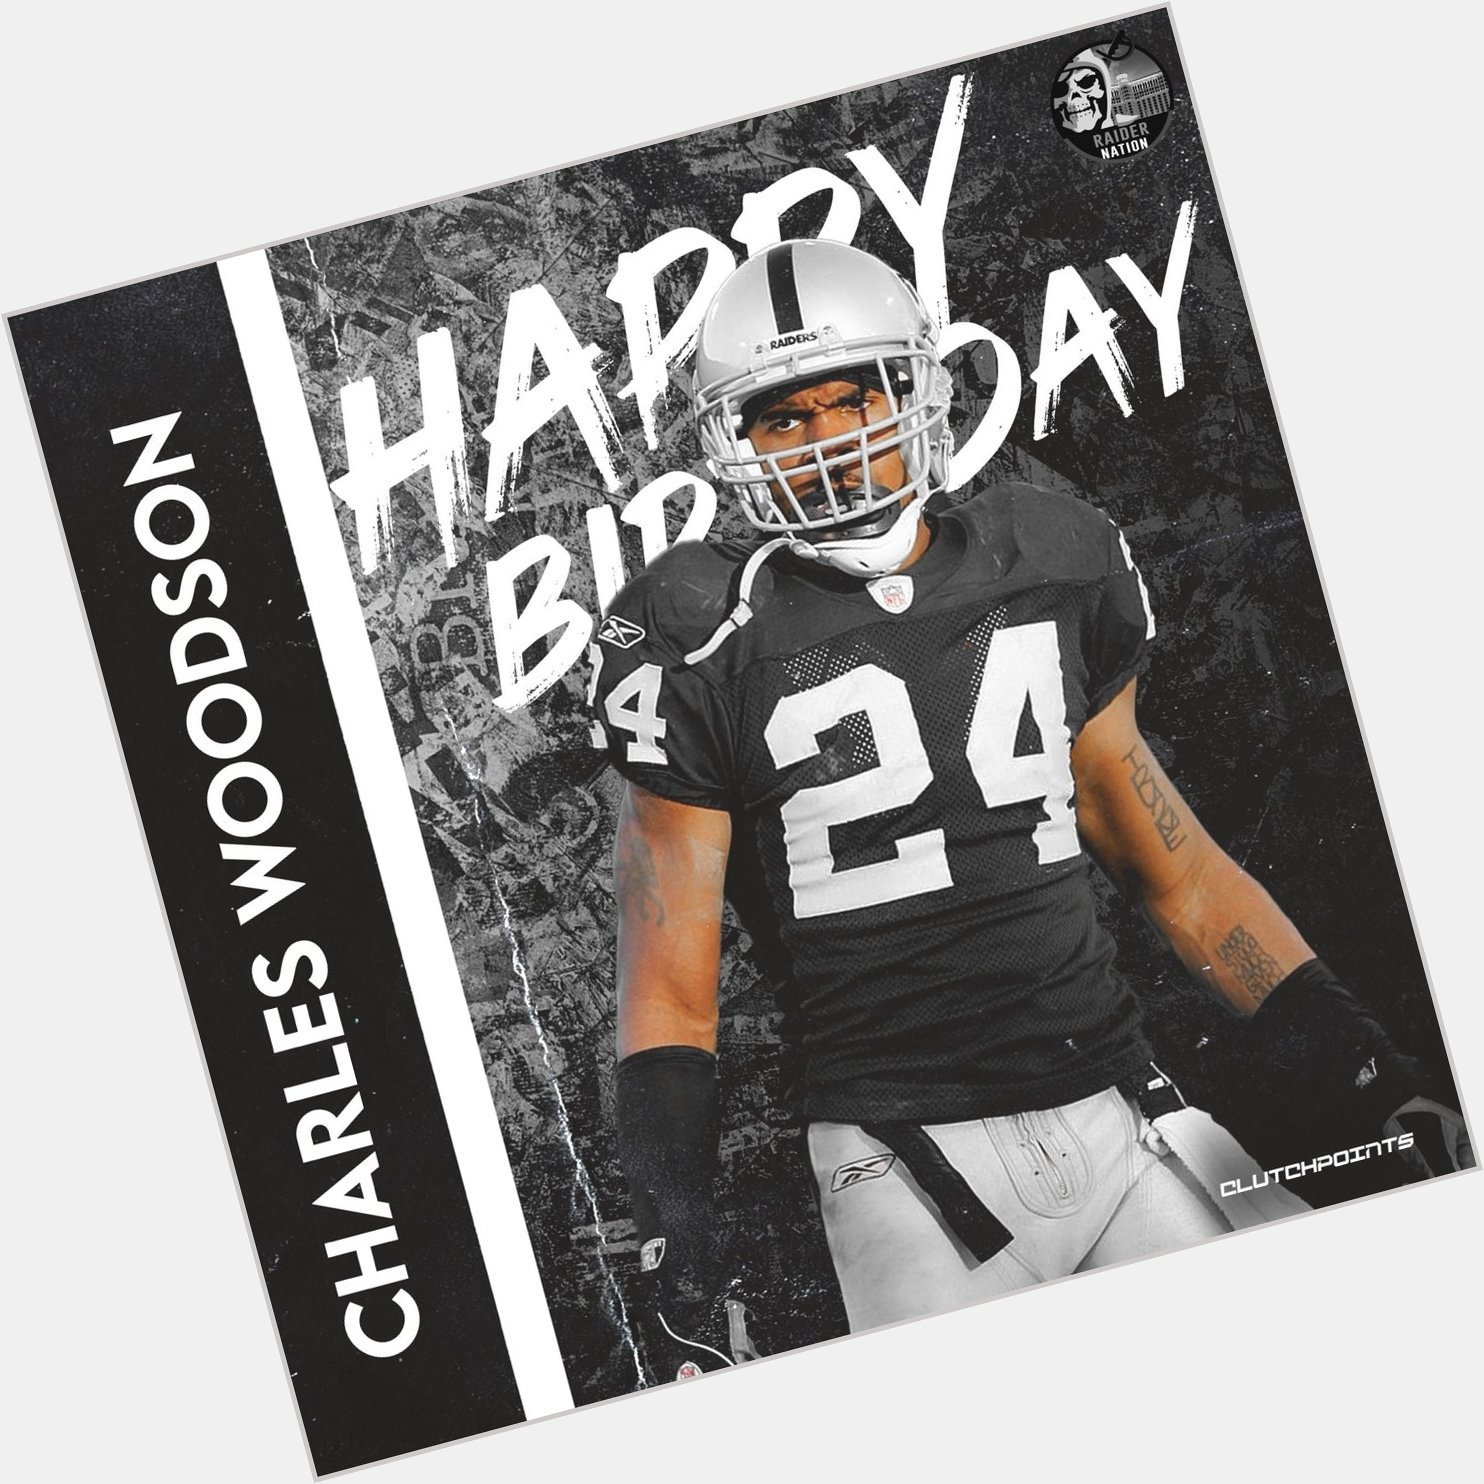 Raiders Nation, join us in wishing a Hall of Famer Charles Woodson a happy 45th birthday! 